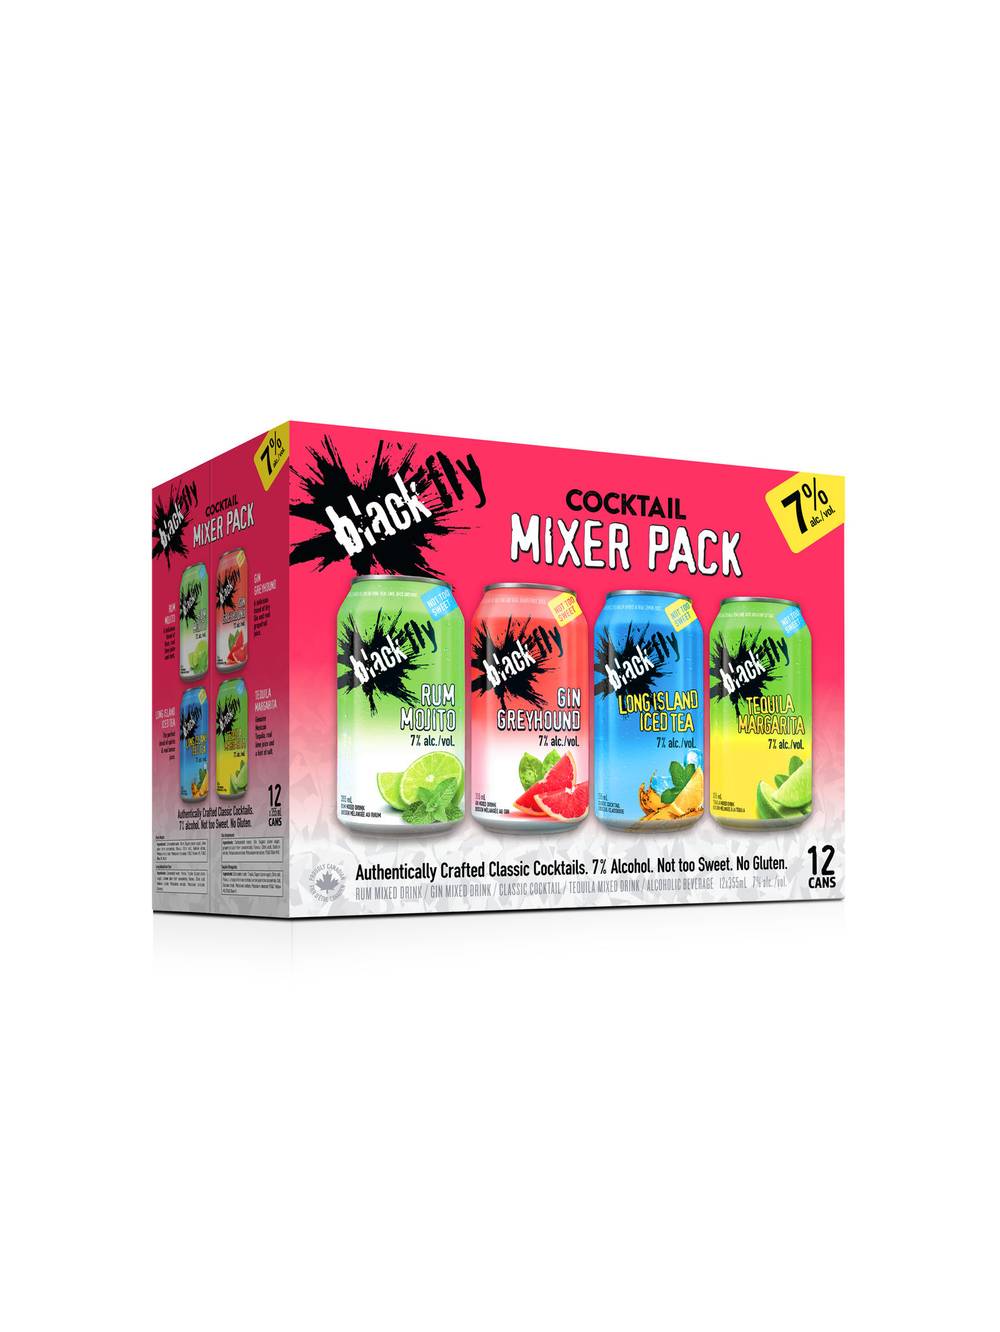 Black Fly Cocktail Mixer pack (12 ct, 0.35 L) (assorted)